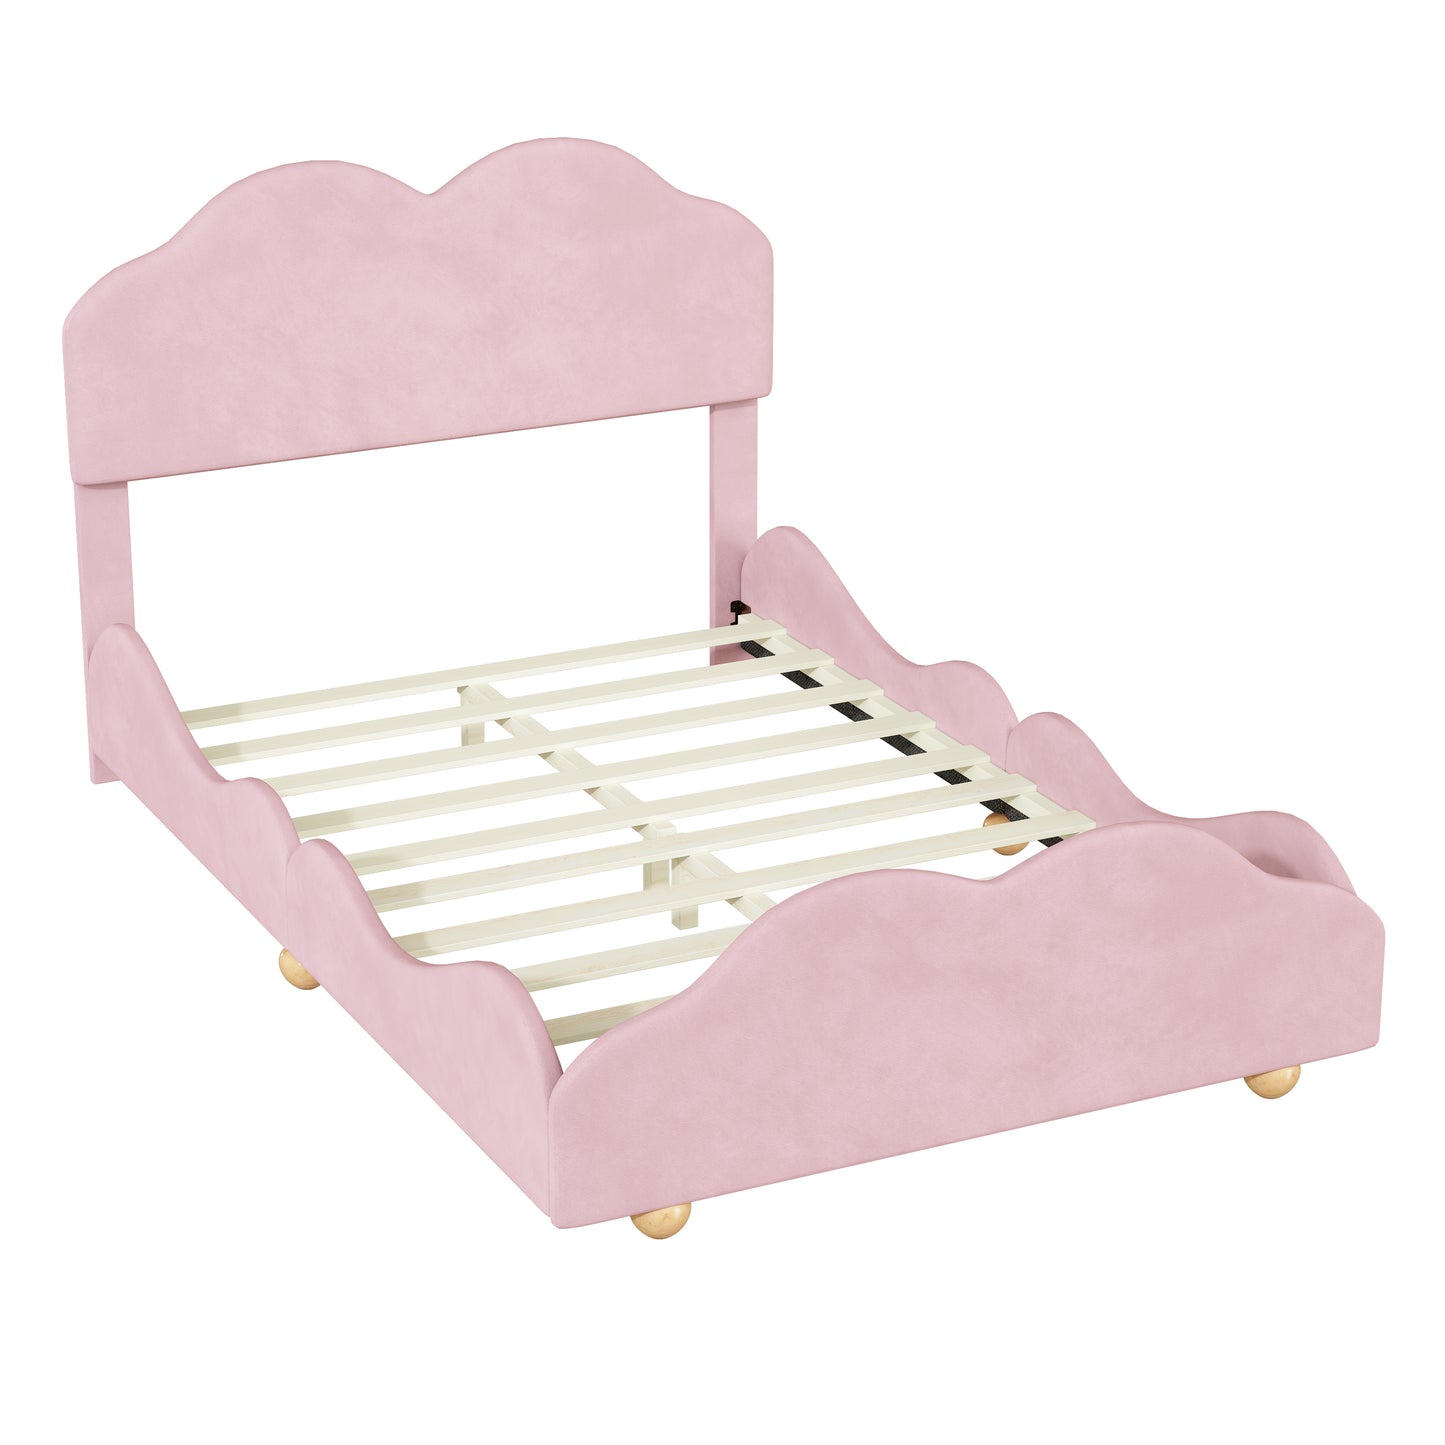 Full Size Upholstered Platform Bed with Cloud Shaped bed board, Light Pink